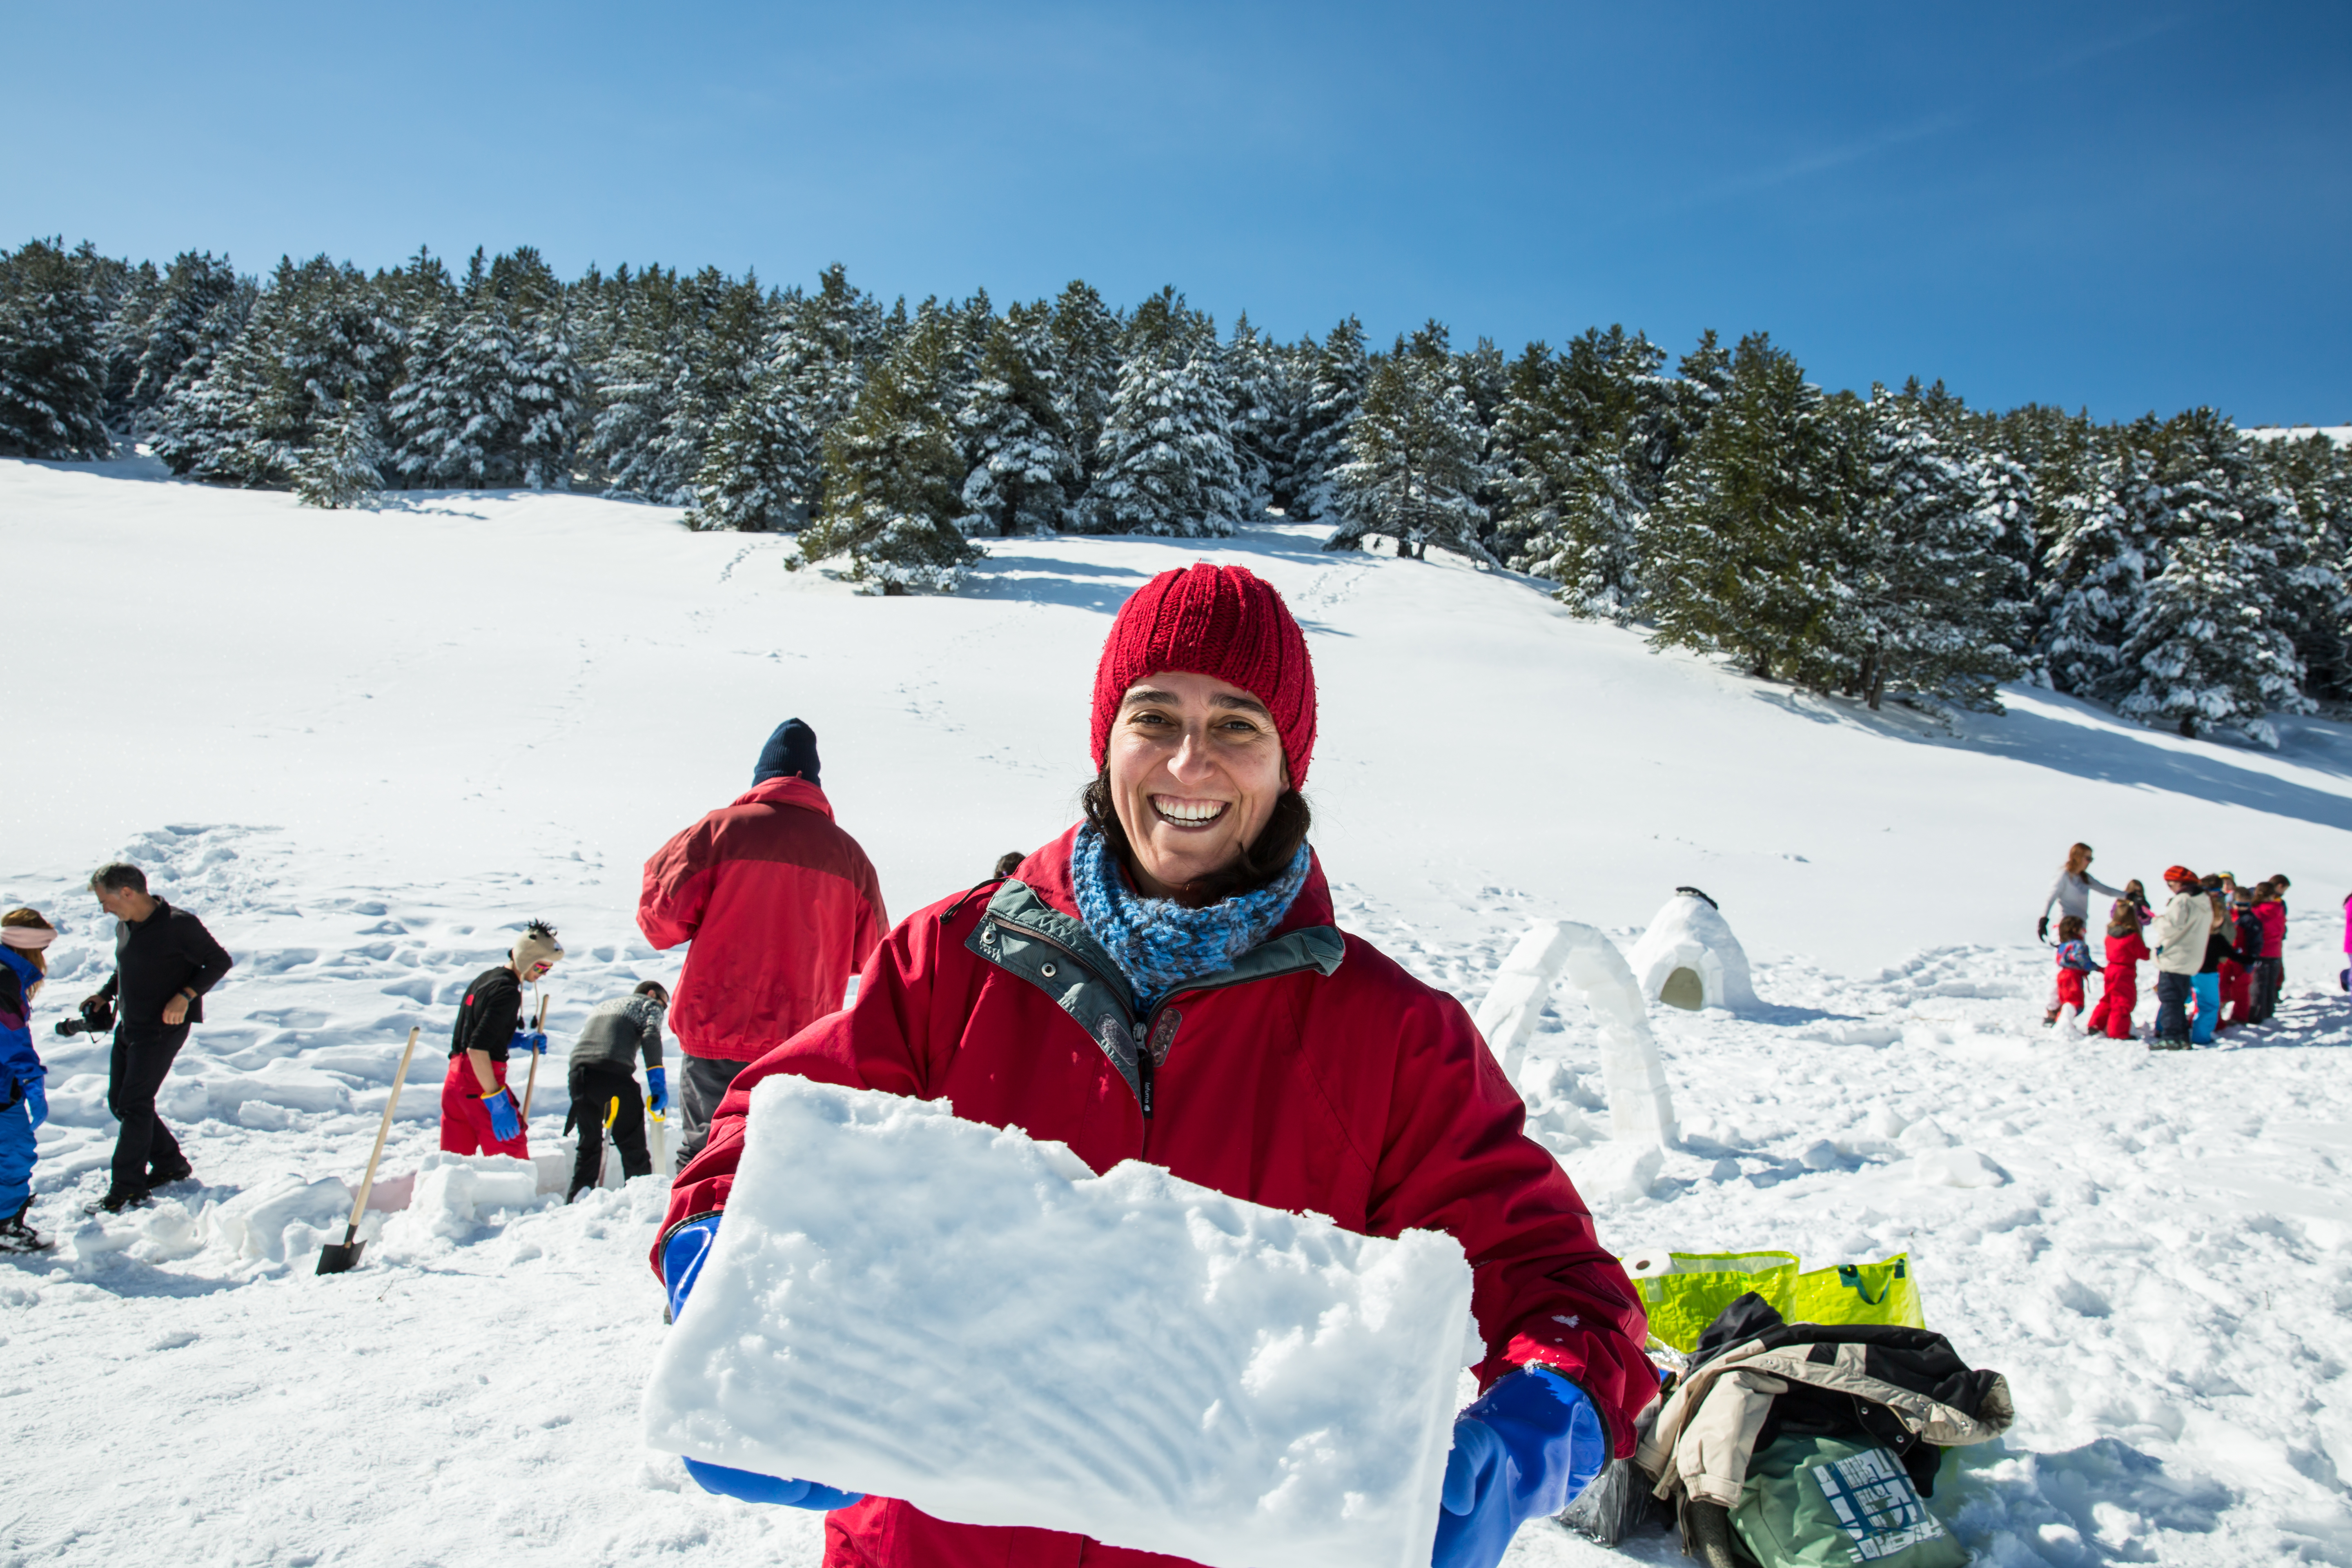 Smiling faces and lots of fun. Are you up for building an igloo?